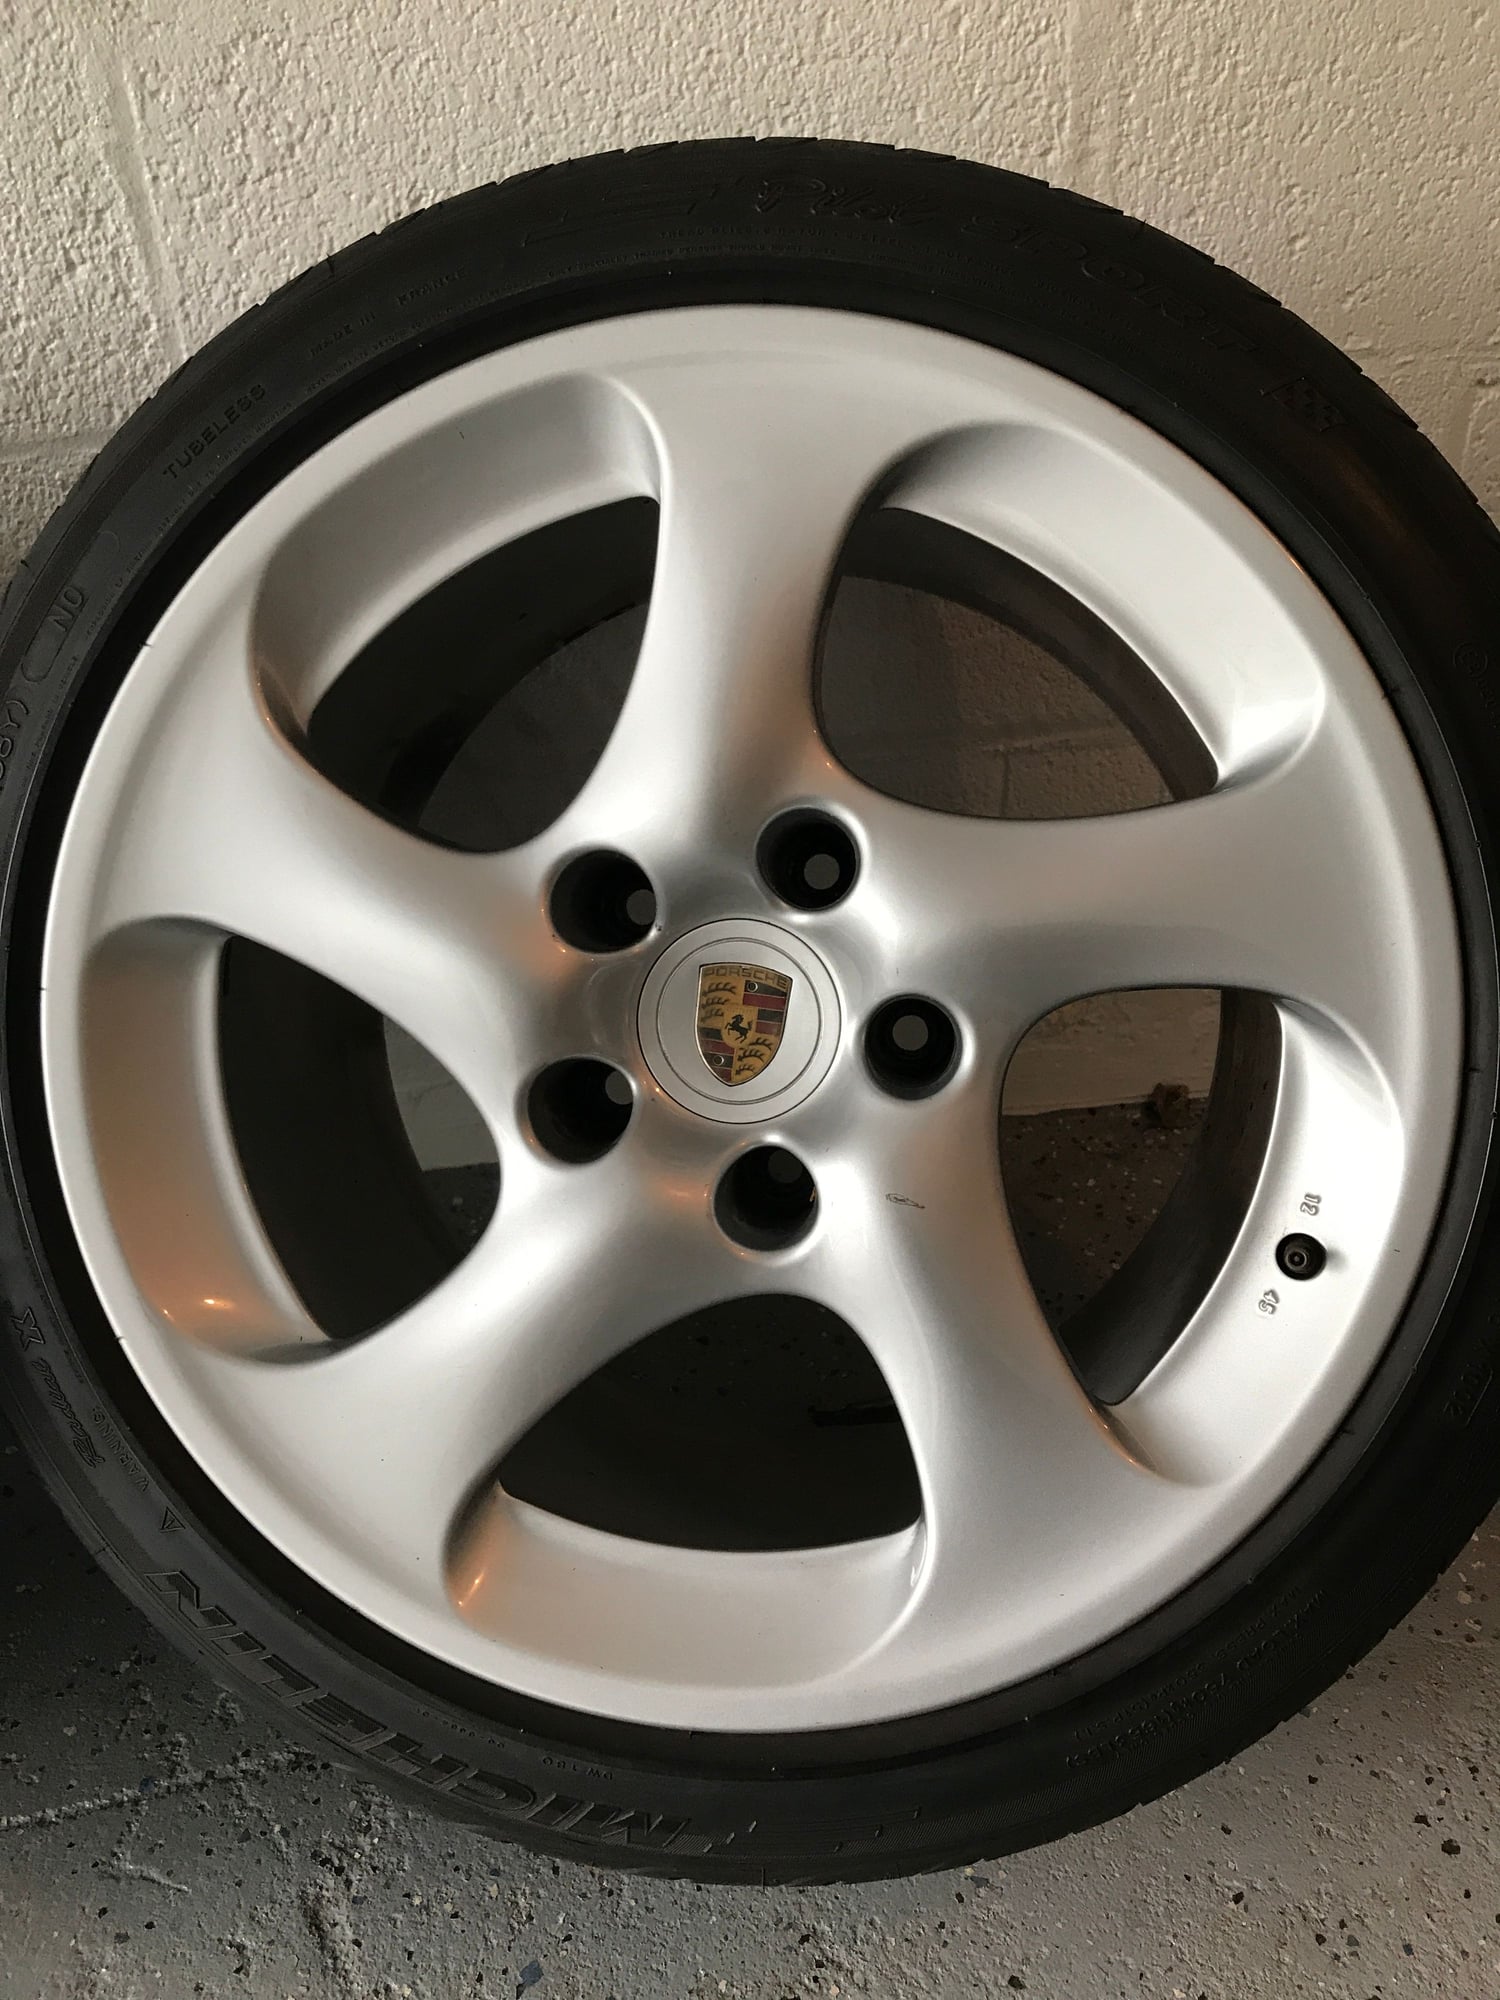 Wheels and Tires/Axles - 18” 996 GT2 Wheels - Used - 2000 to 2008 Porsche 911 - Mountainside, NJ 07092, United States